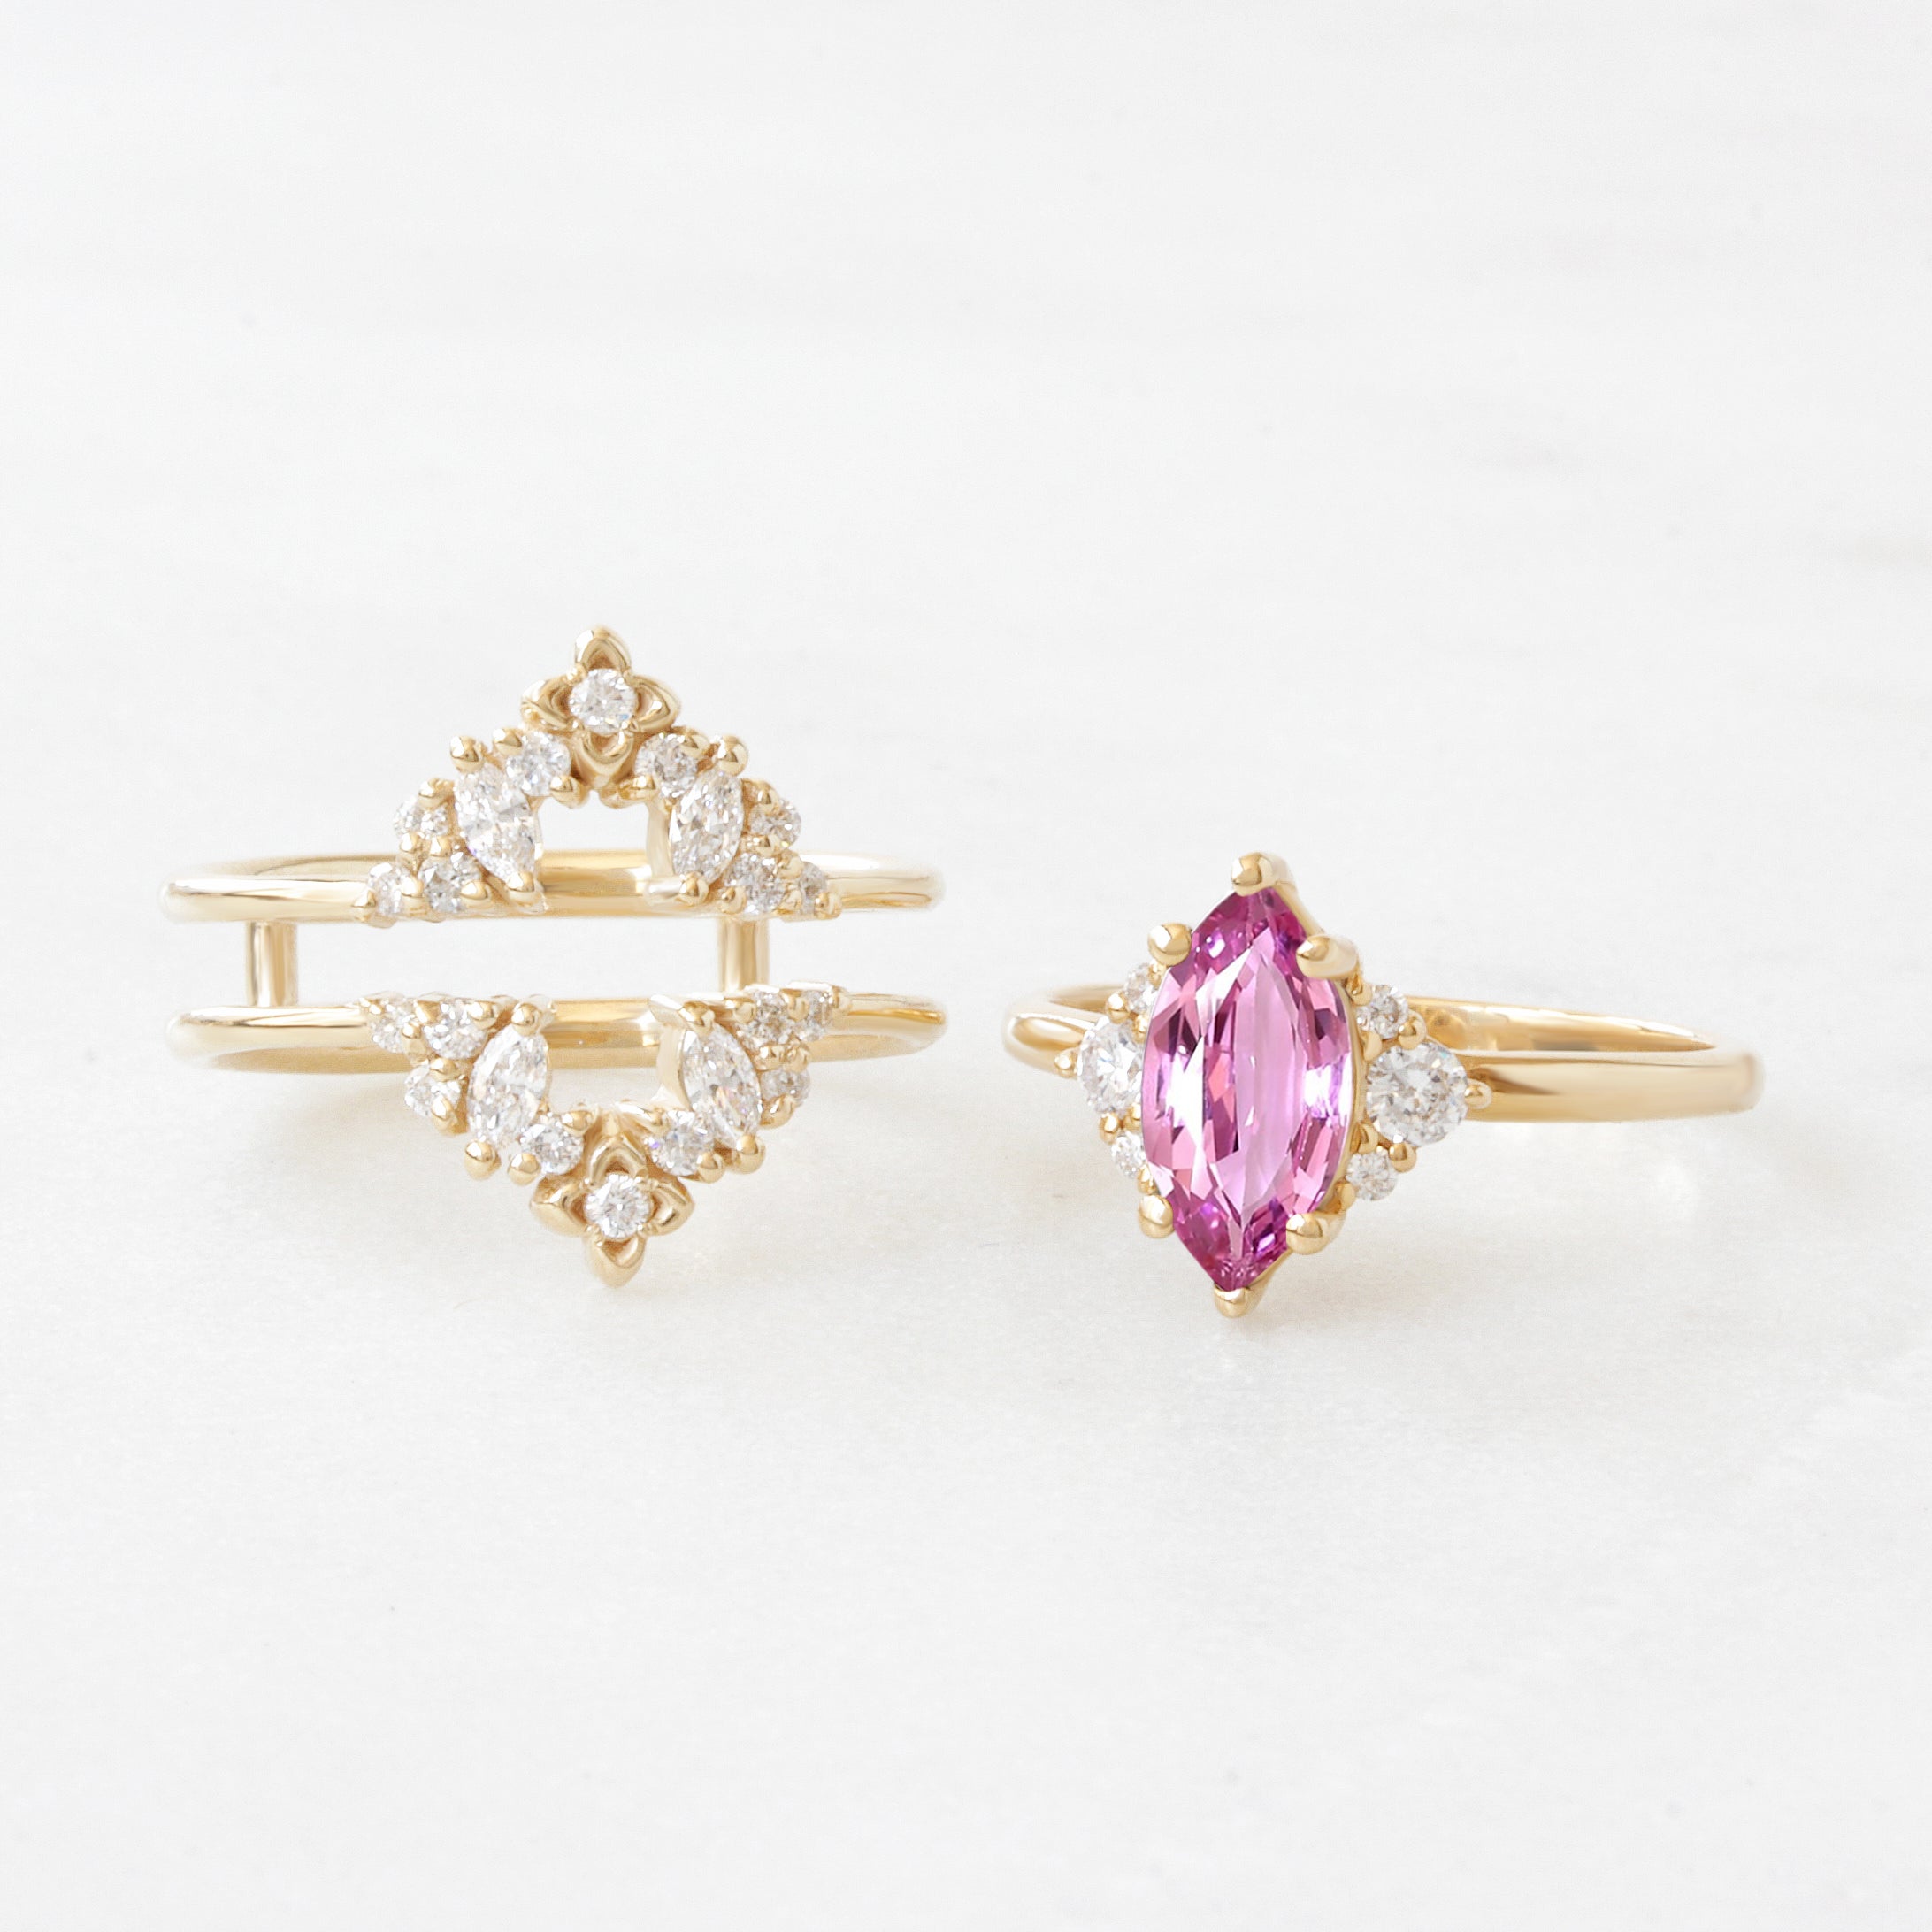 Marquise pink sapphire diamonds detailed engagement ring “Isabella” with Orchid ring guard ♥